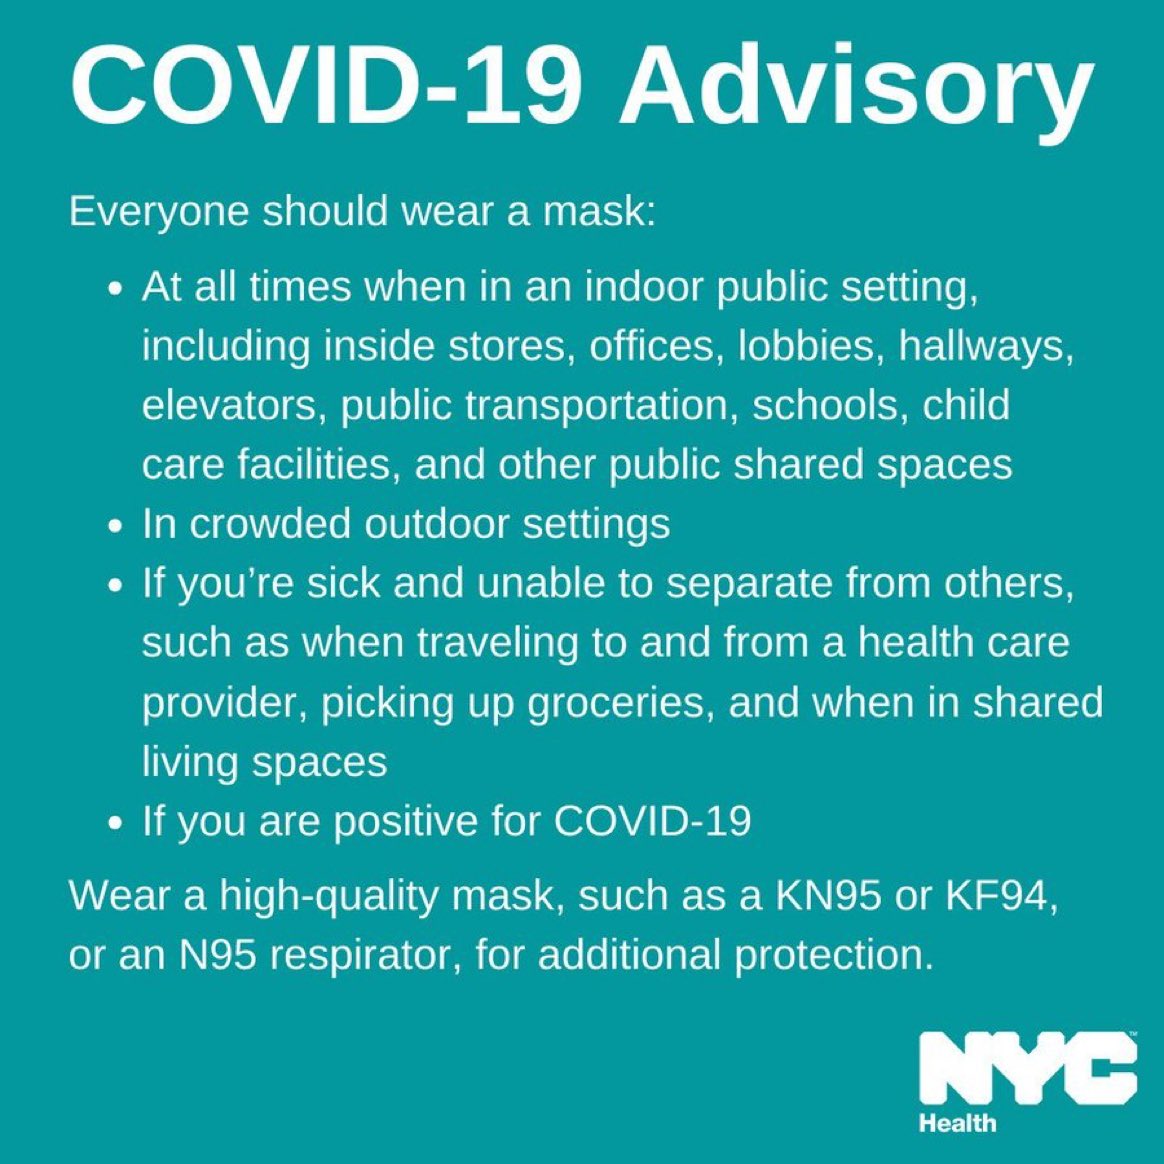 ⚠️MASK WEARING ADVISORY— New York City health department issues rec to #WearAMask “at all times when in an indoor public settings” including stores, schools, childcare facilities, elevators, public transit, public shared spaces, & even *crowded outdoor settings*! #BringBackMasks